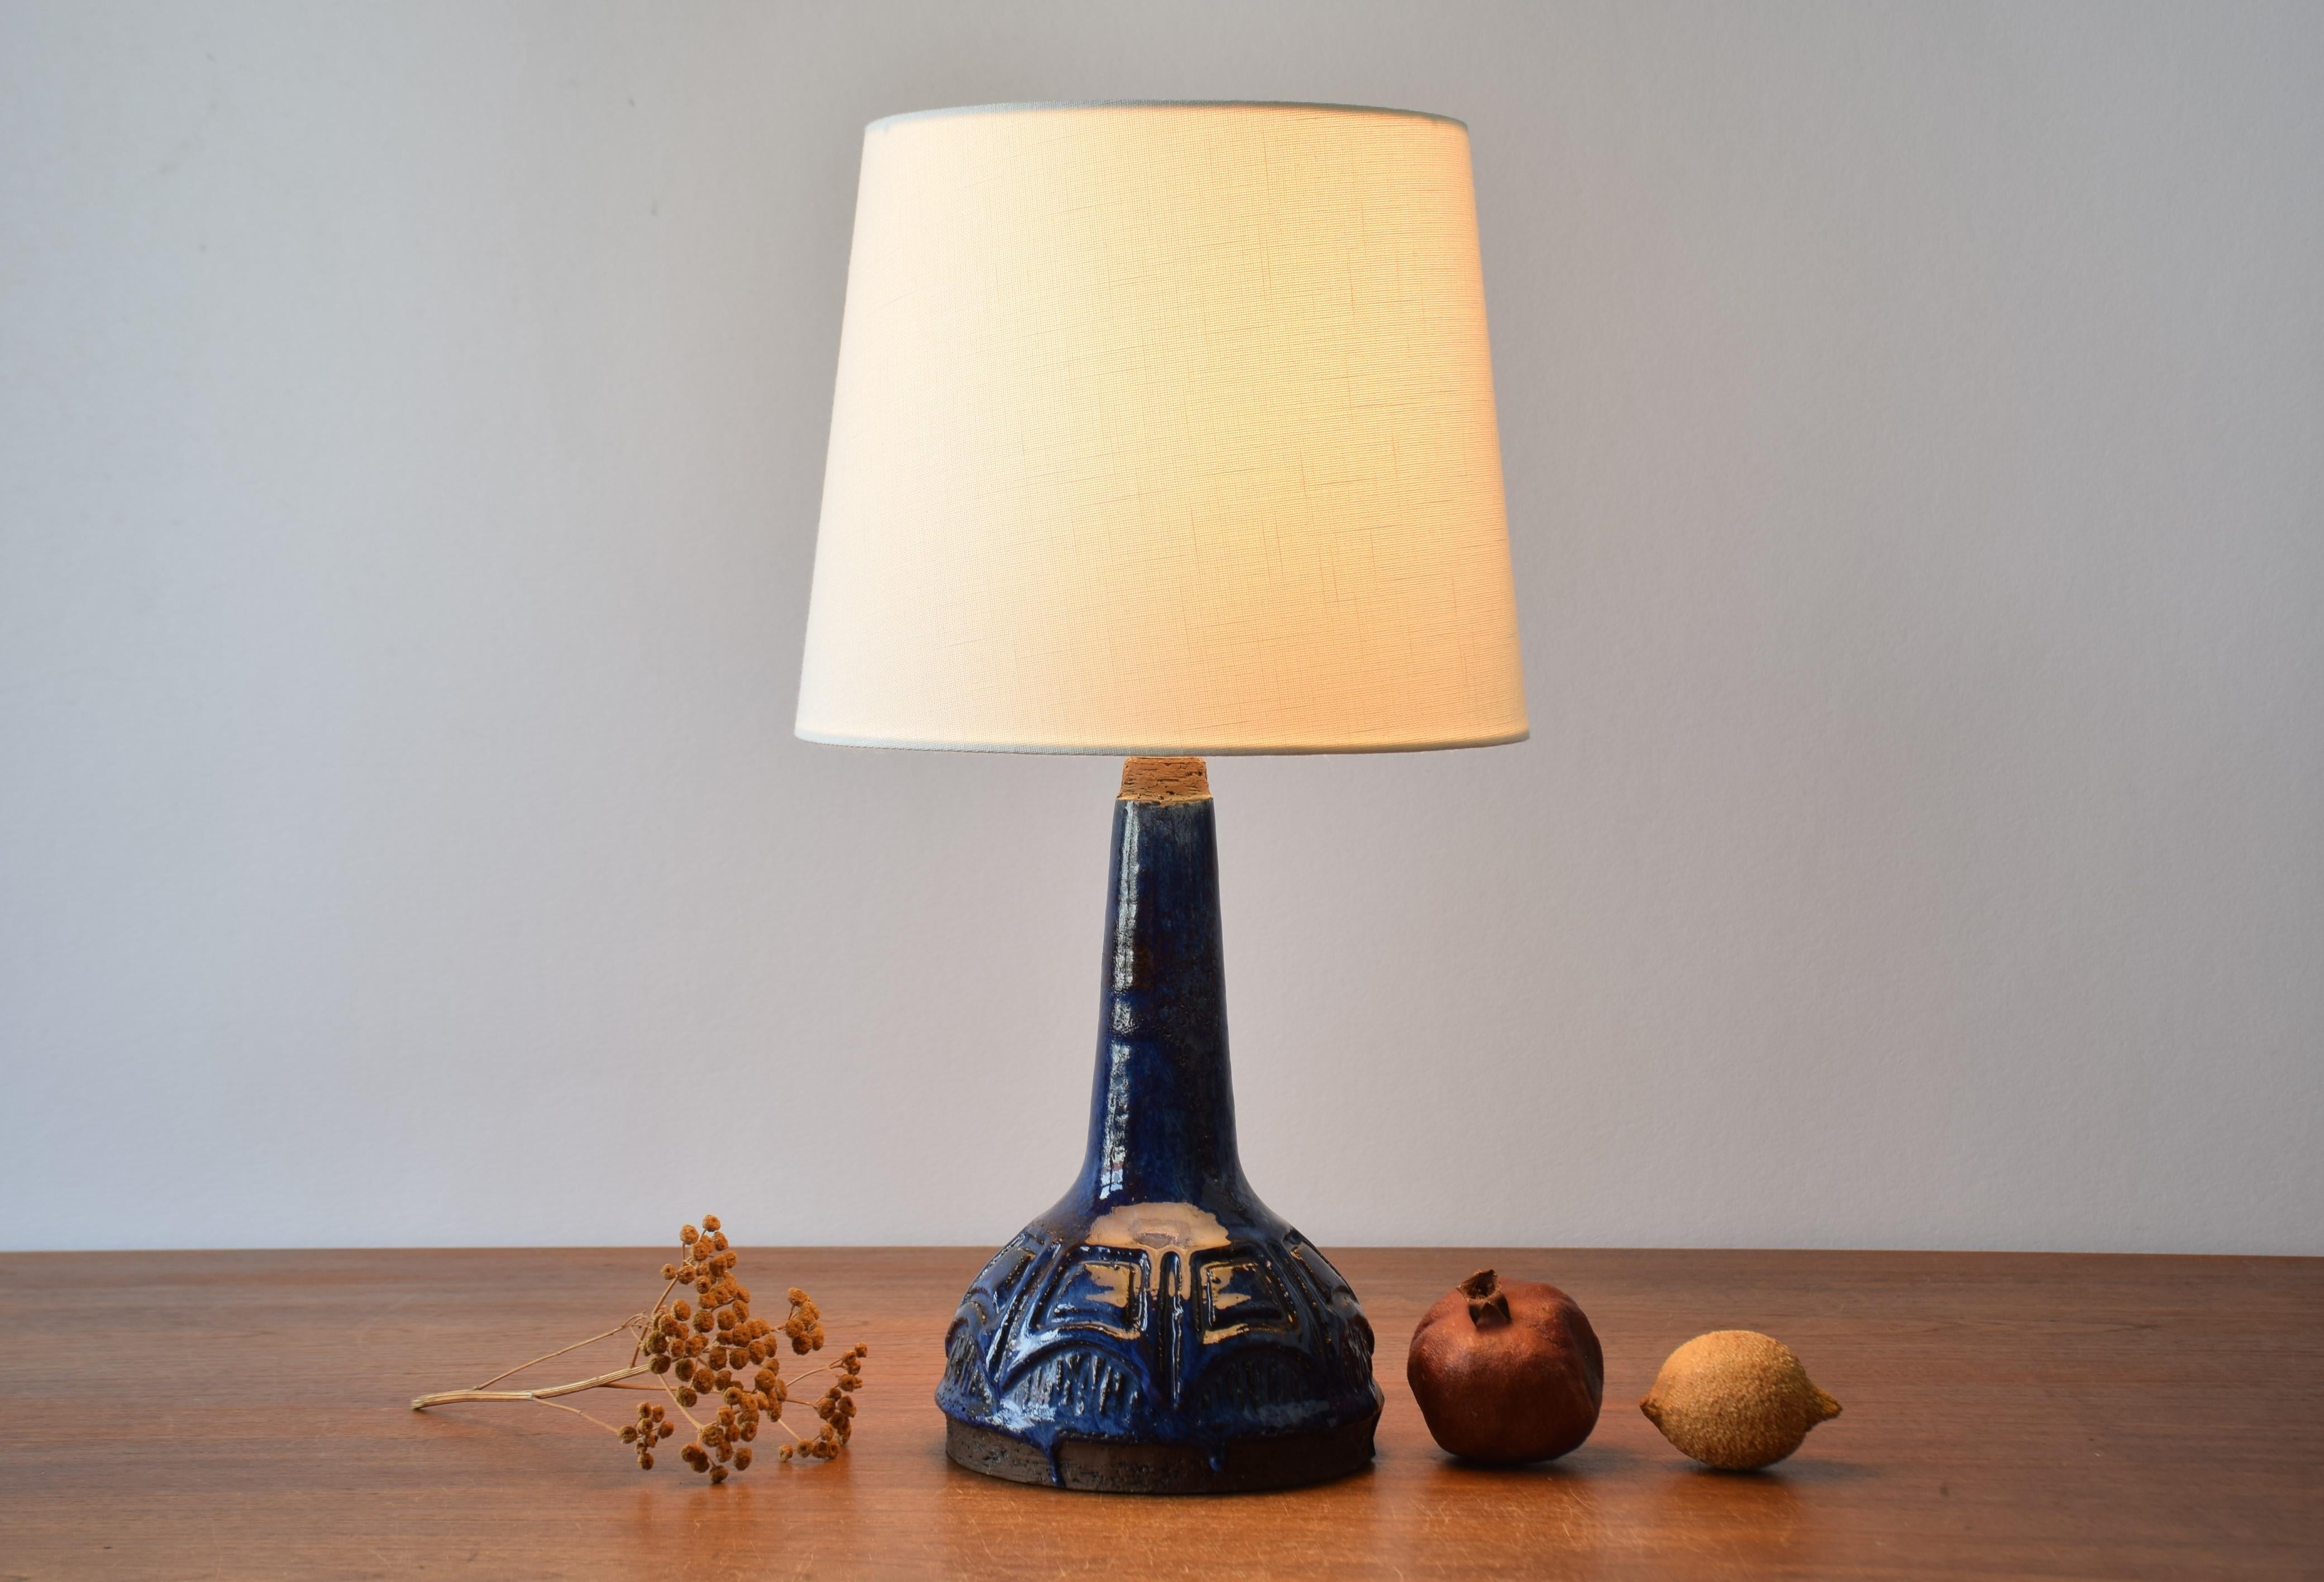 Mid-century Danish ceramic table lamp by Fridtjof Sejersen for Sejer. Made ca 1960s to 1970s. It´s made in his own studio workshop in Nr. Aaby on the Danish island Funen which he ran from 1941 to 1978.

The lamp has an interesting glaze in dark